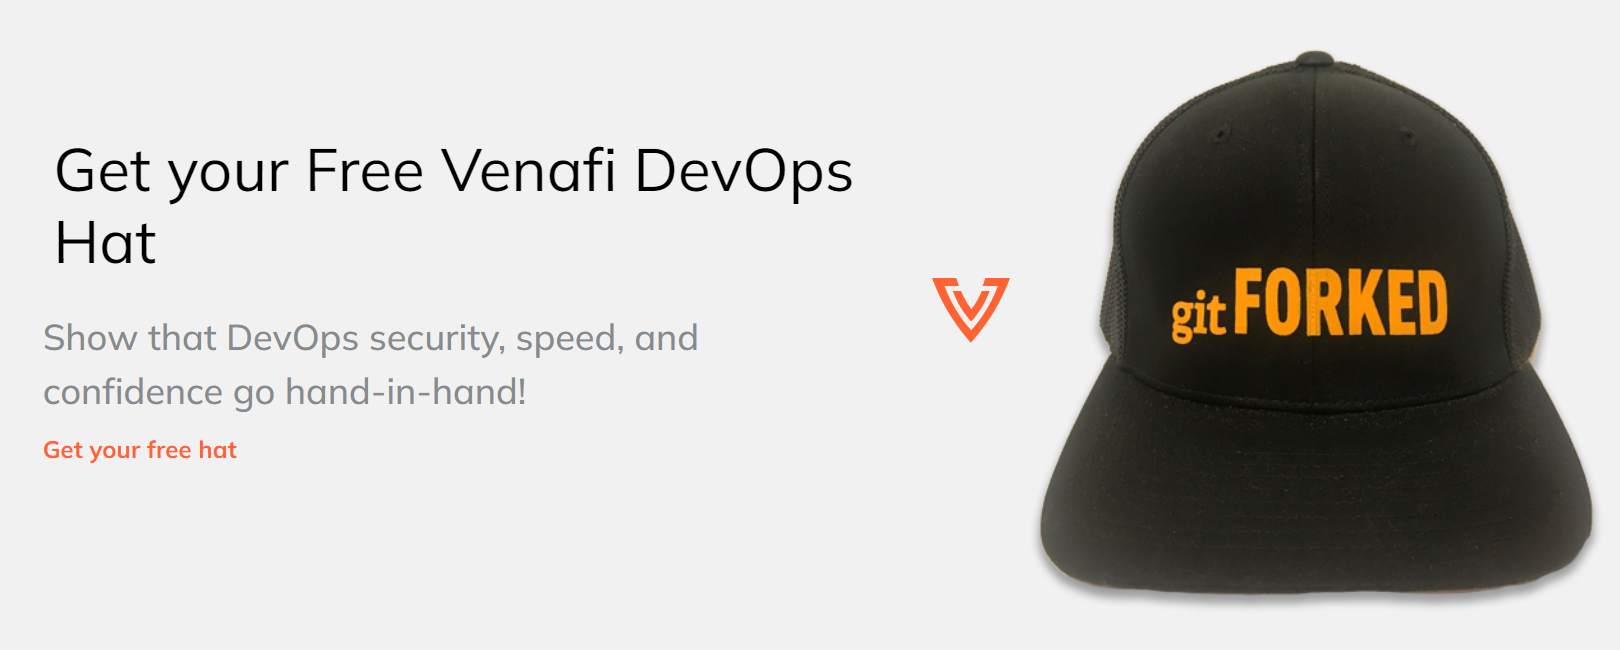 FREE git FORKED Hat from Venafi